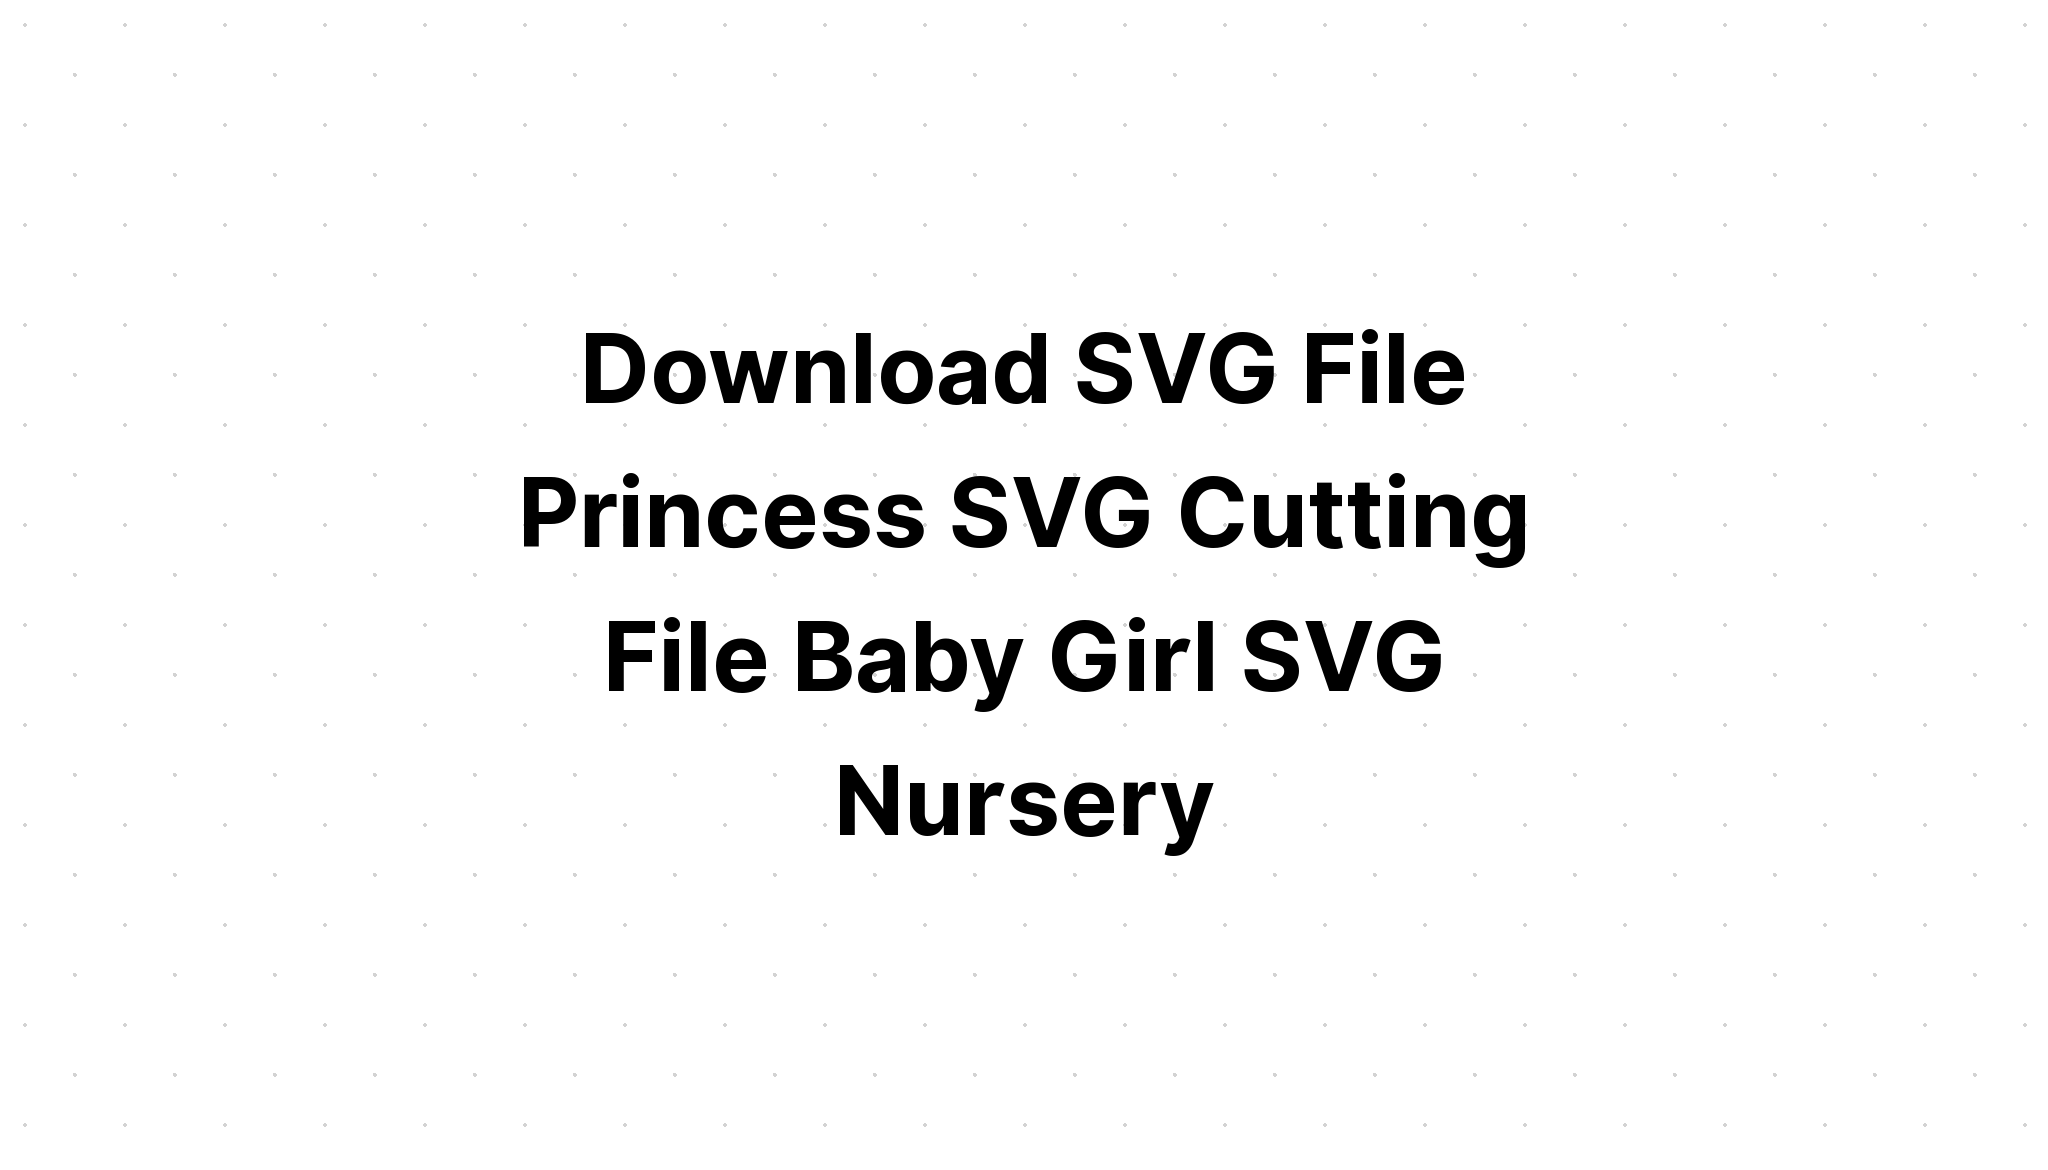 Download Free Svg Cut Images For Babies - Layered SVG Cut File